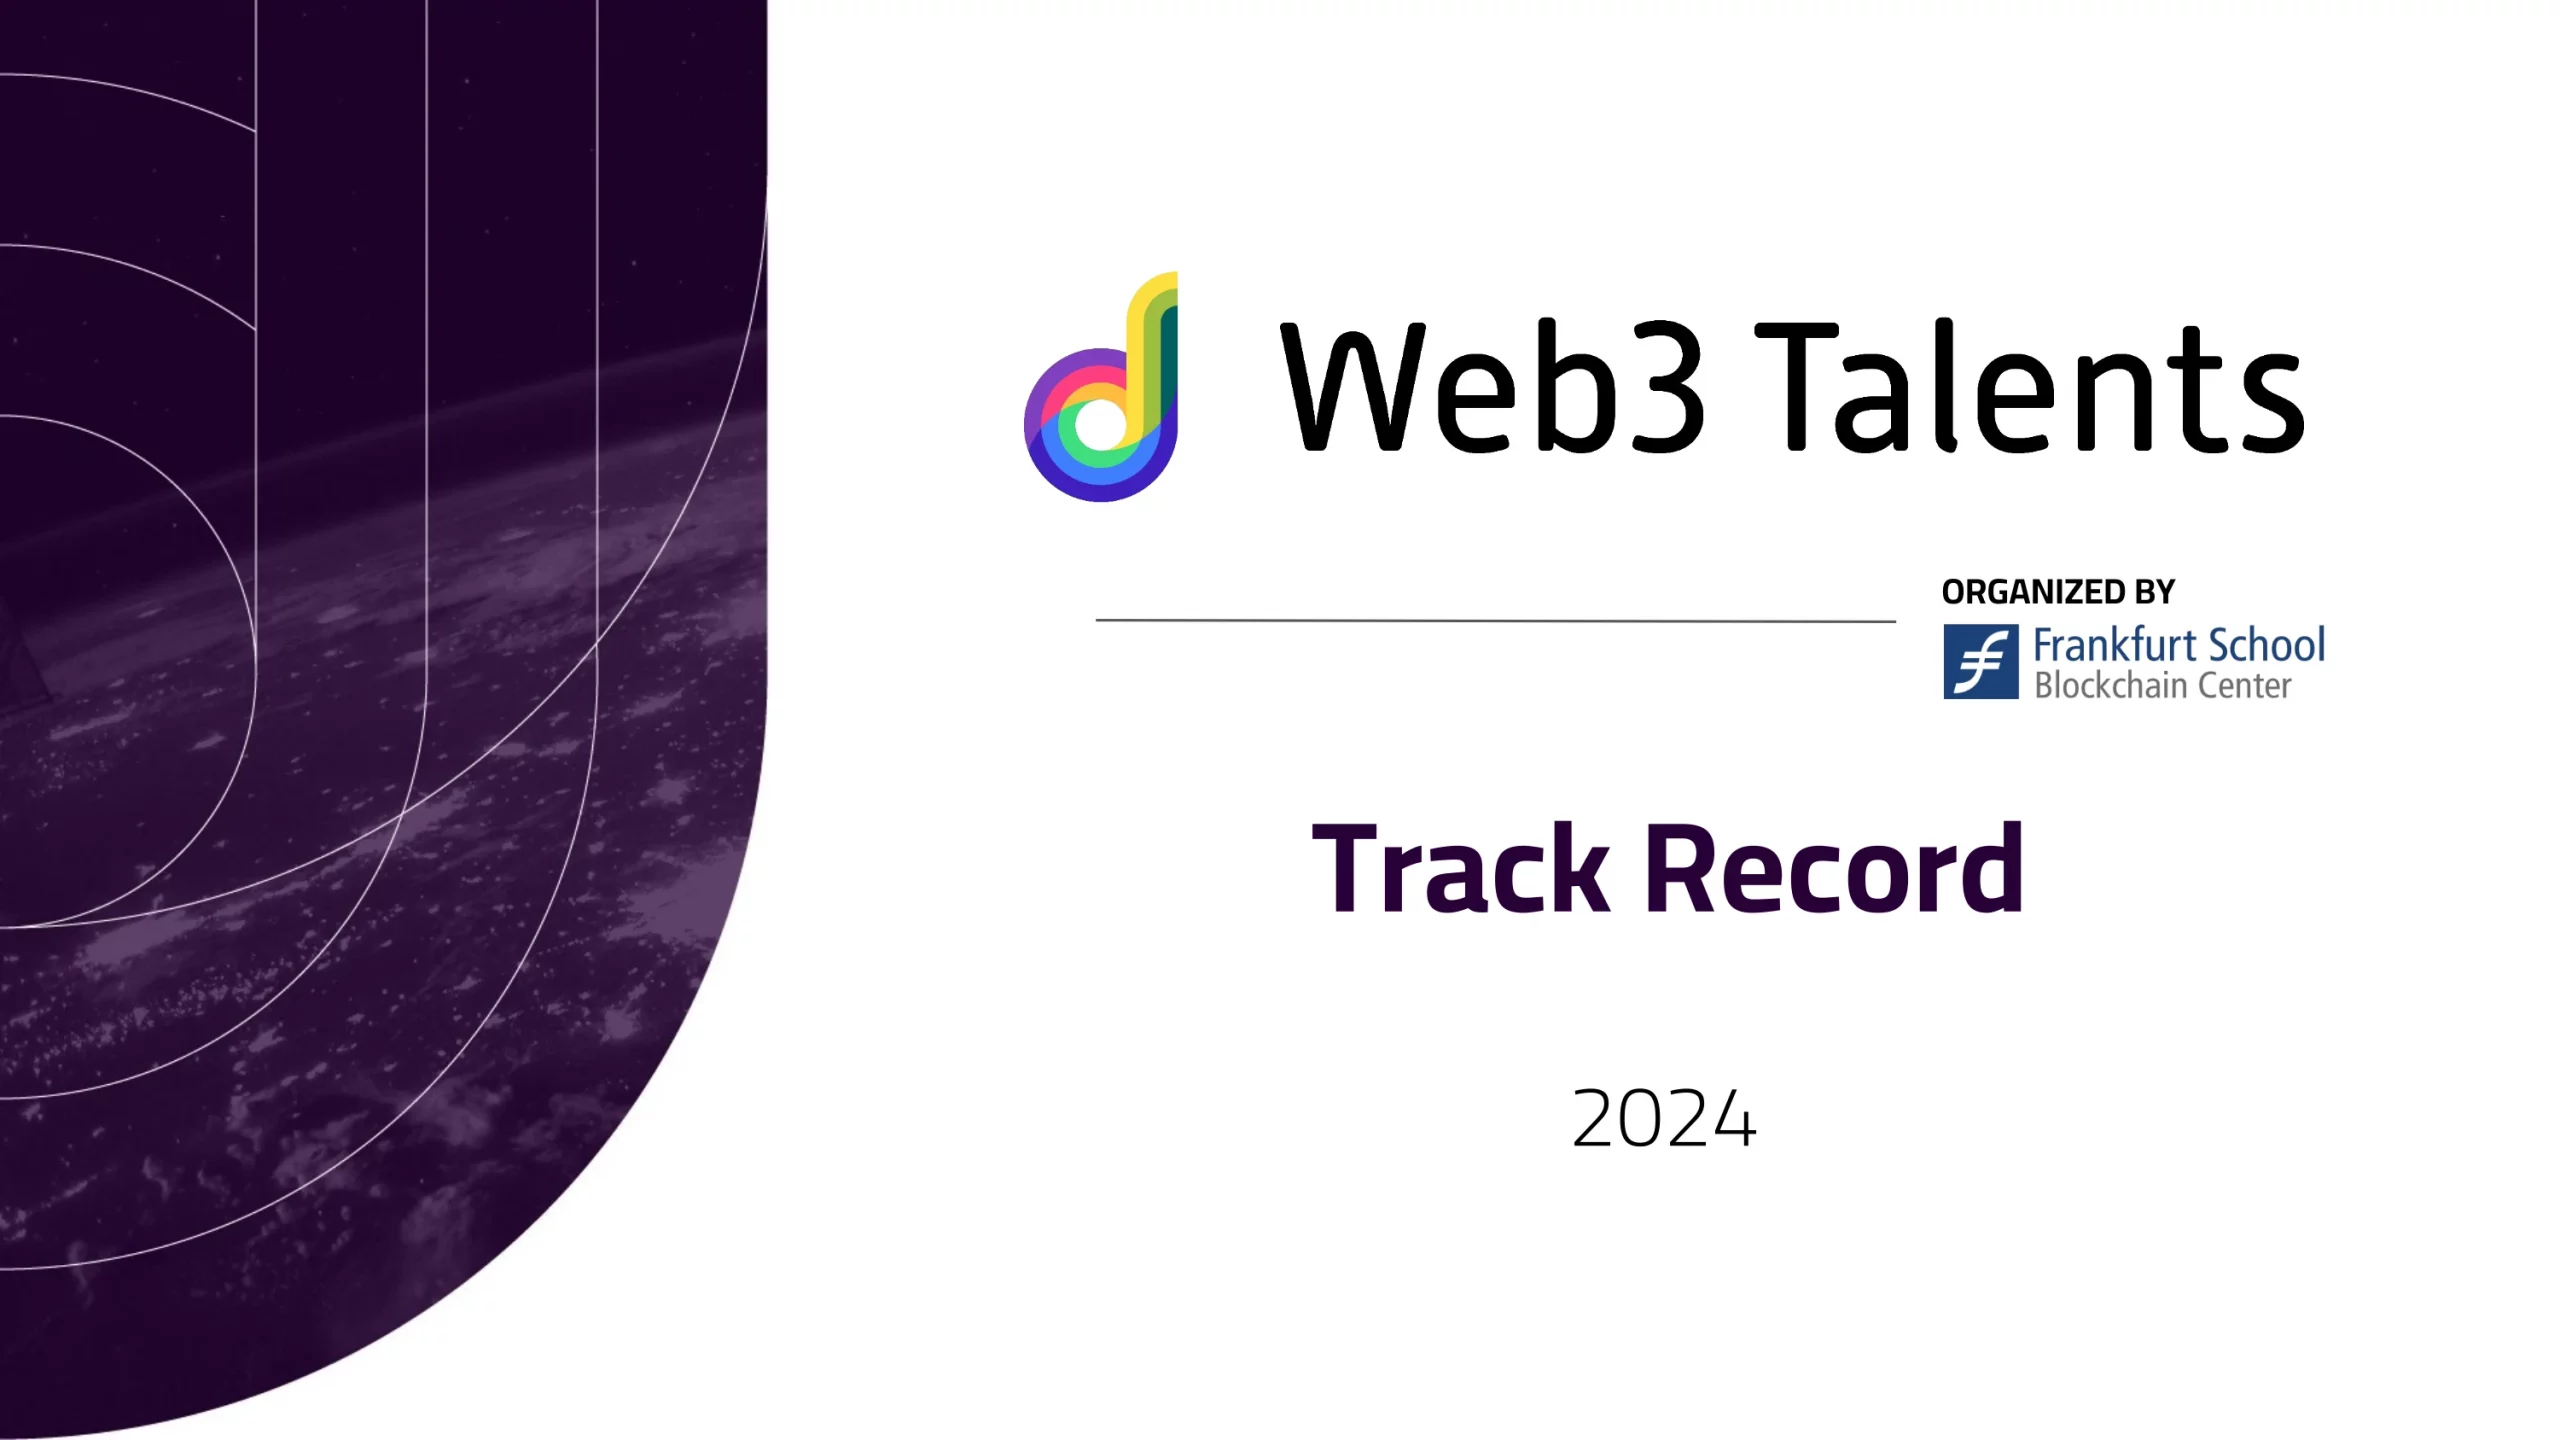 Web3 Talents Track Record 2024 Released